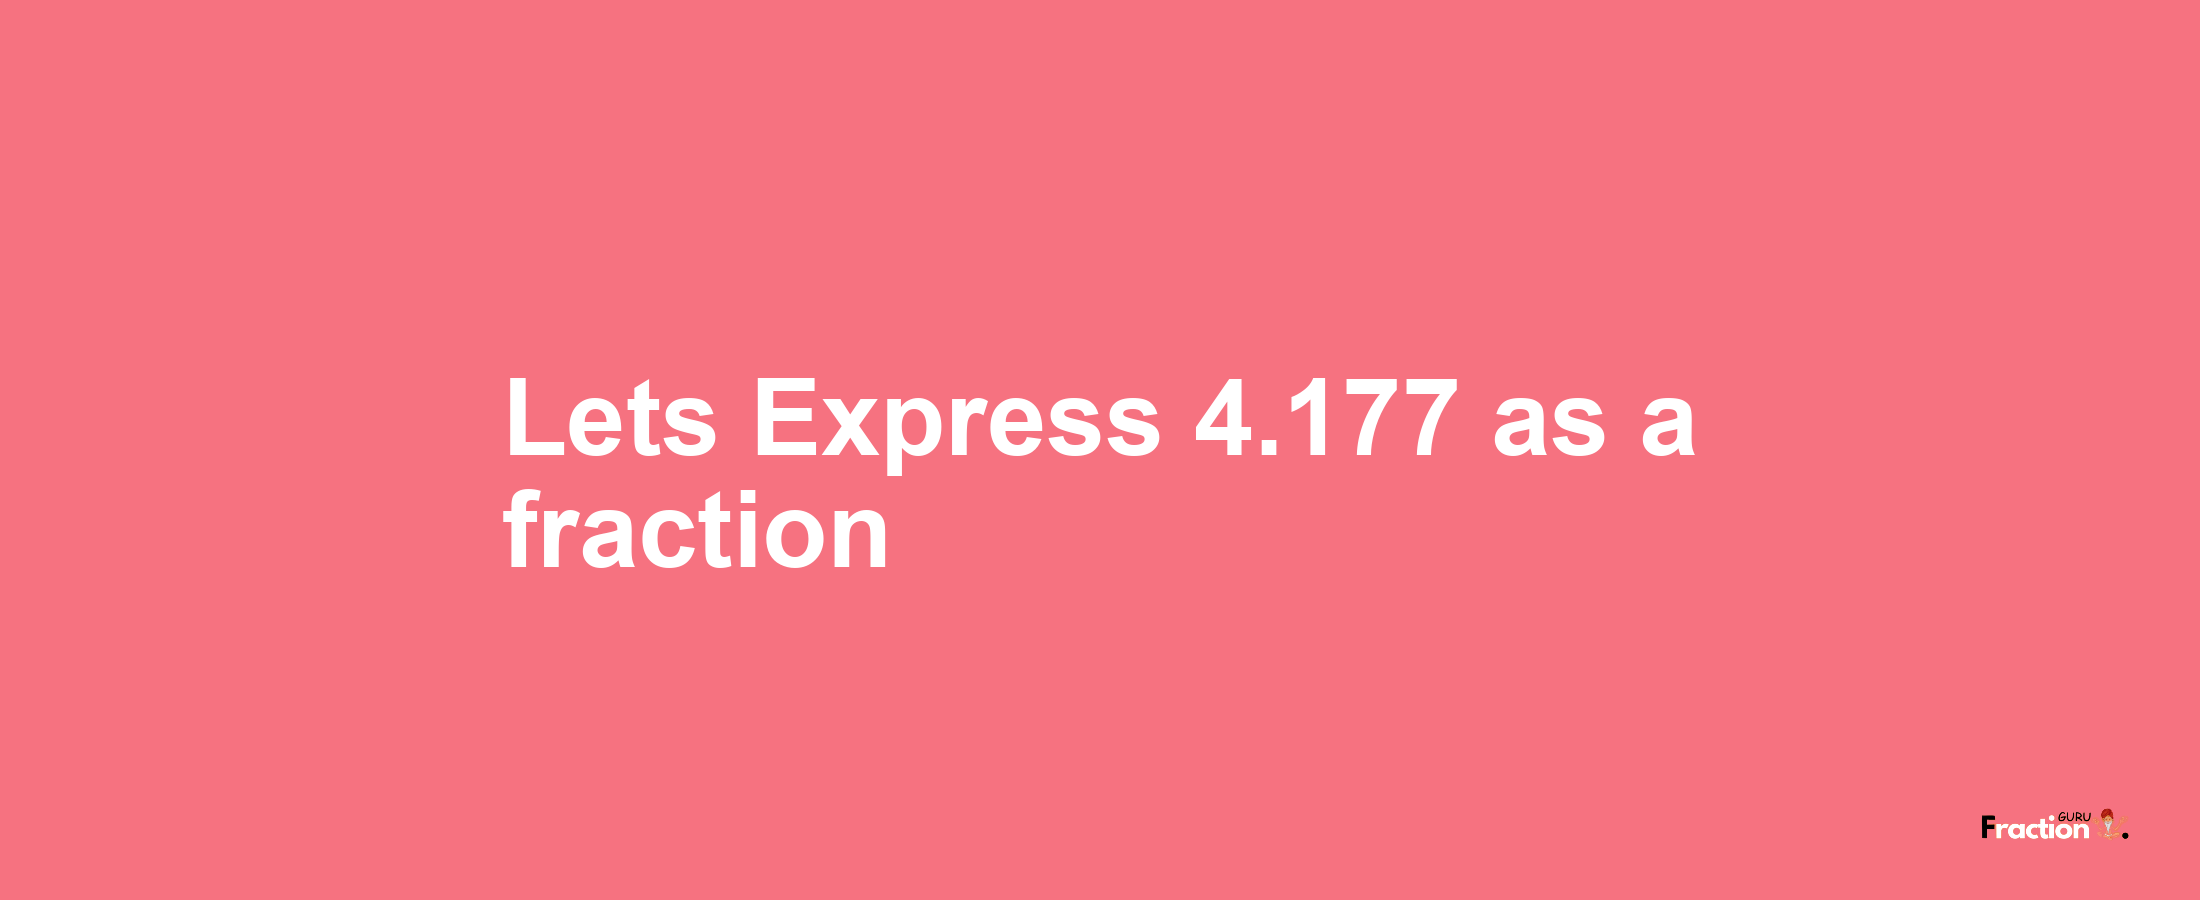 Lets Express 4.177 as afraction